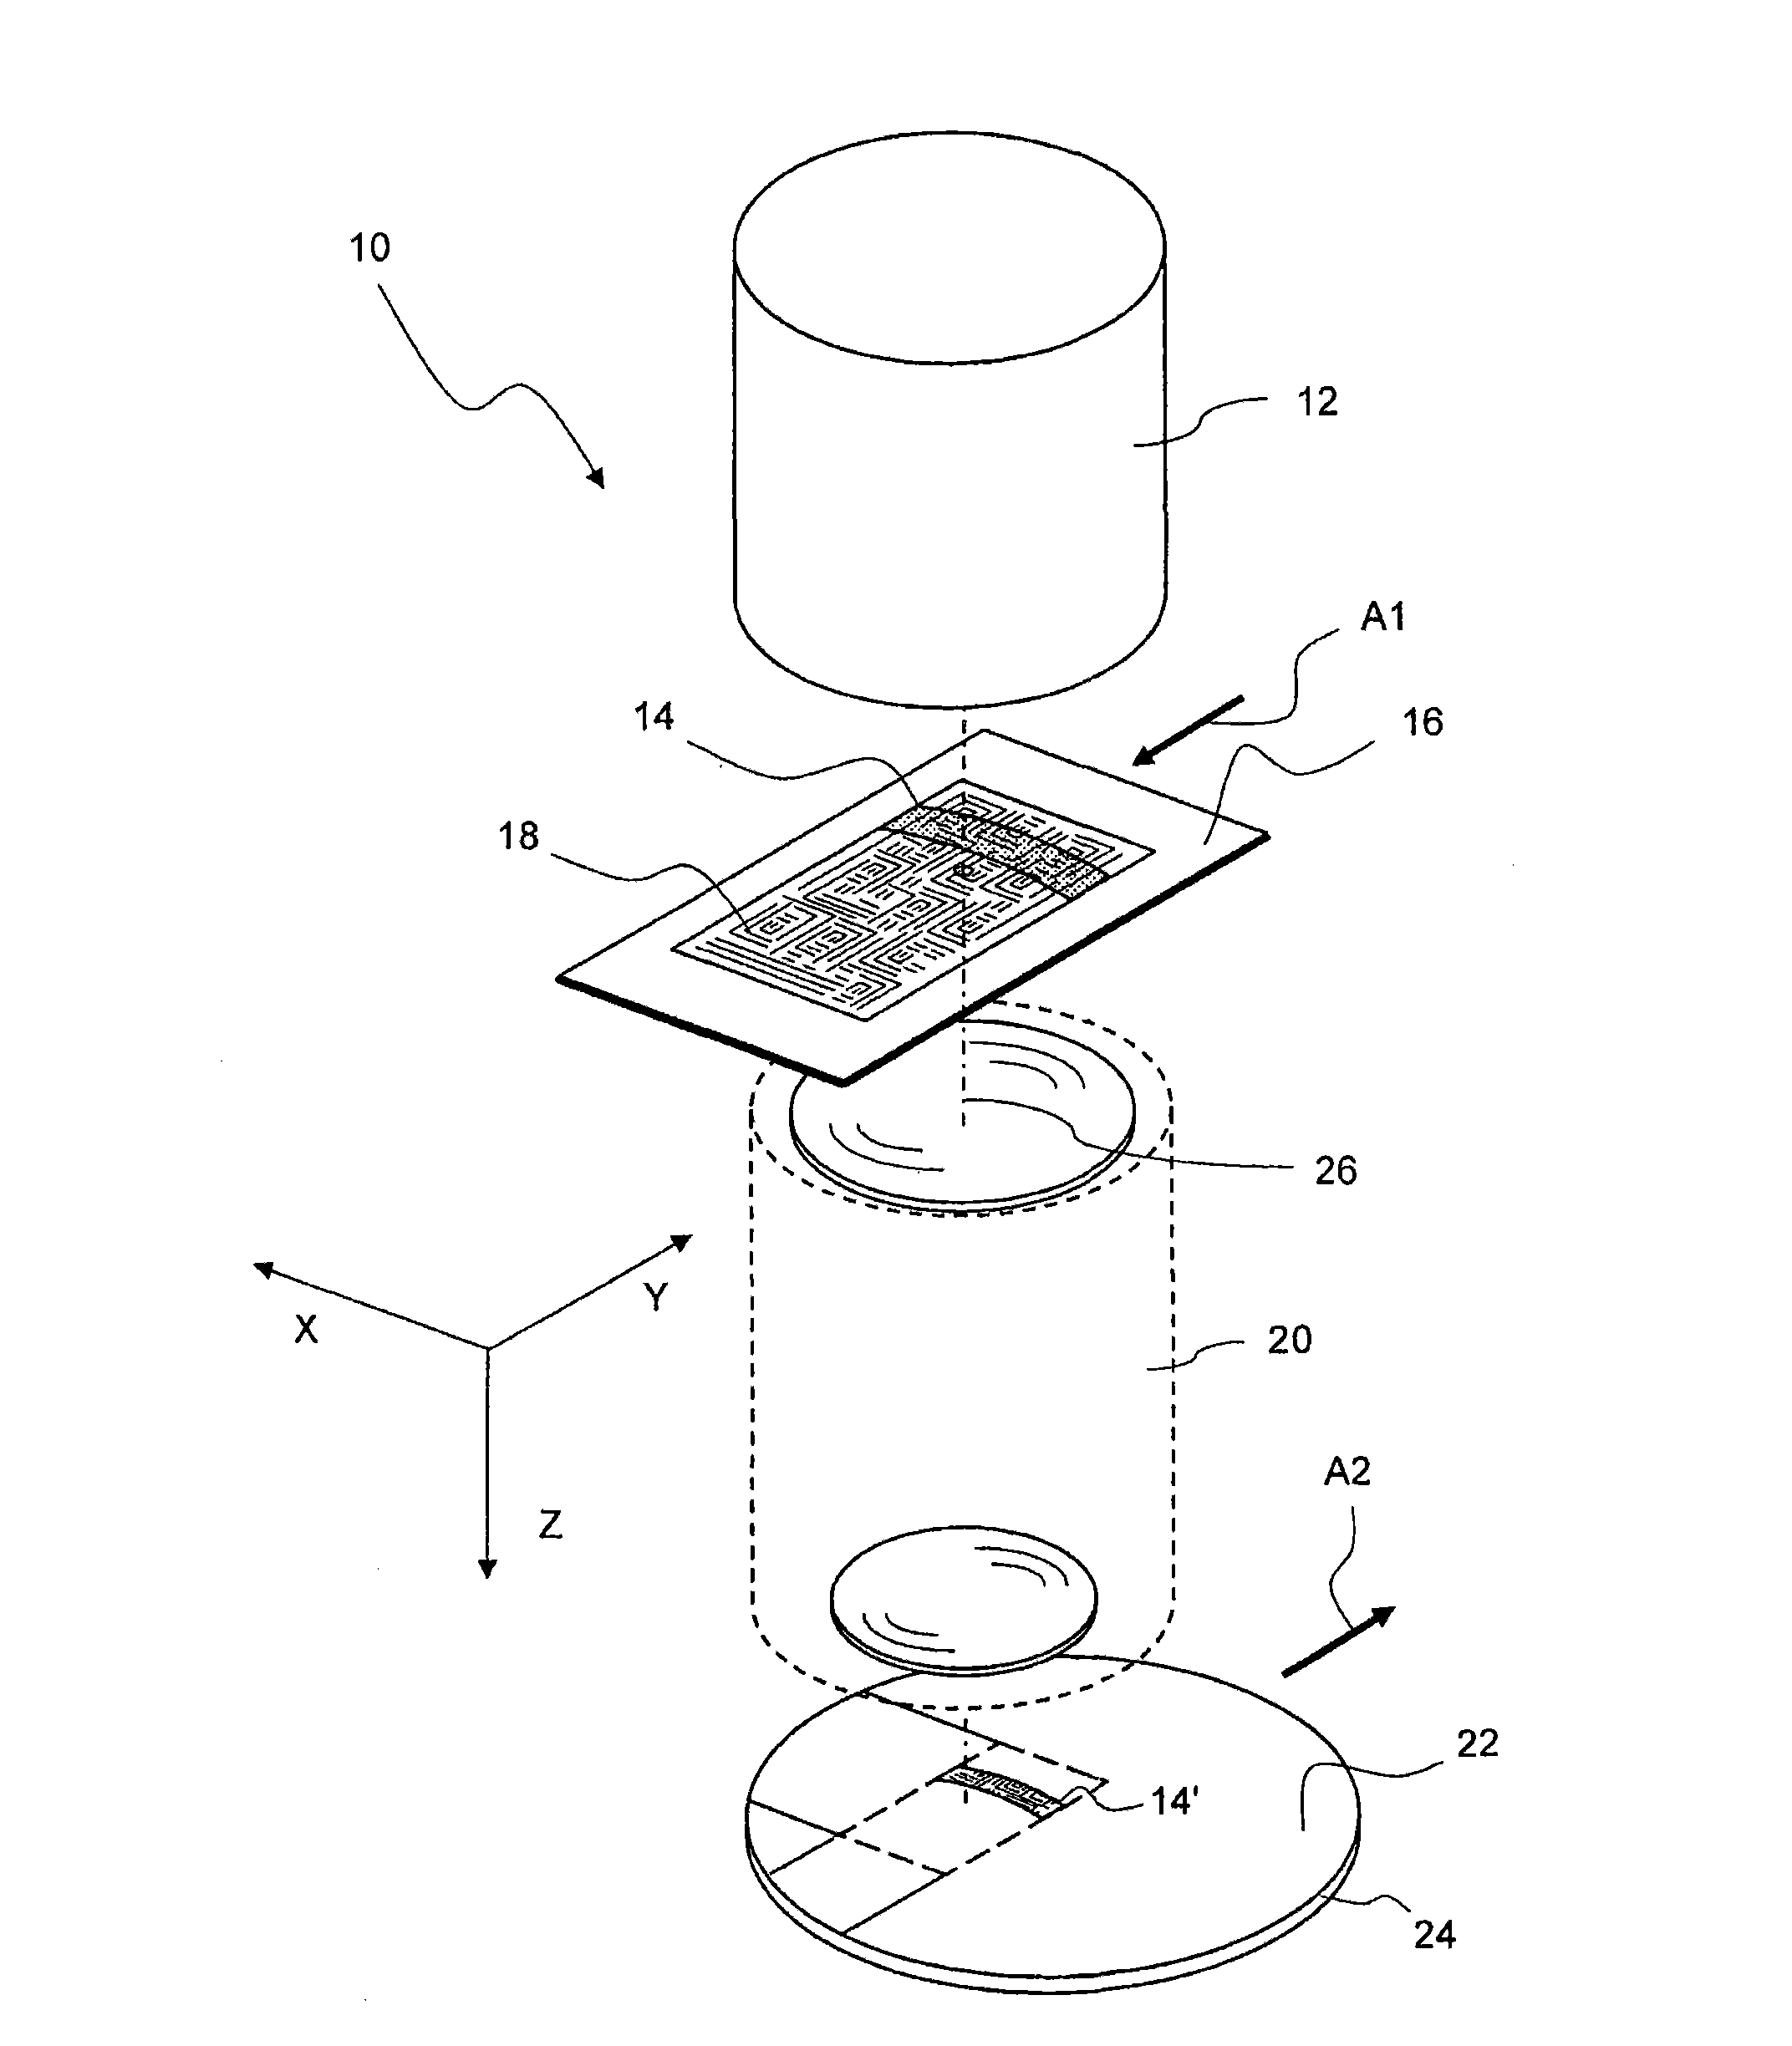 Illumination system for illuminating a mask in a microlithographic exposure apparatus